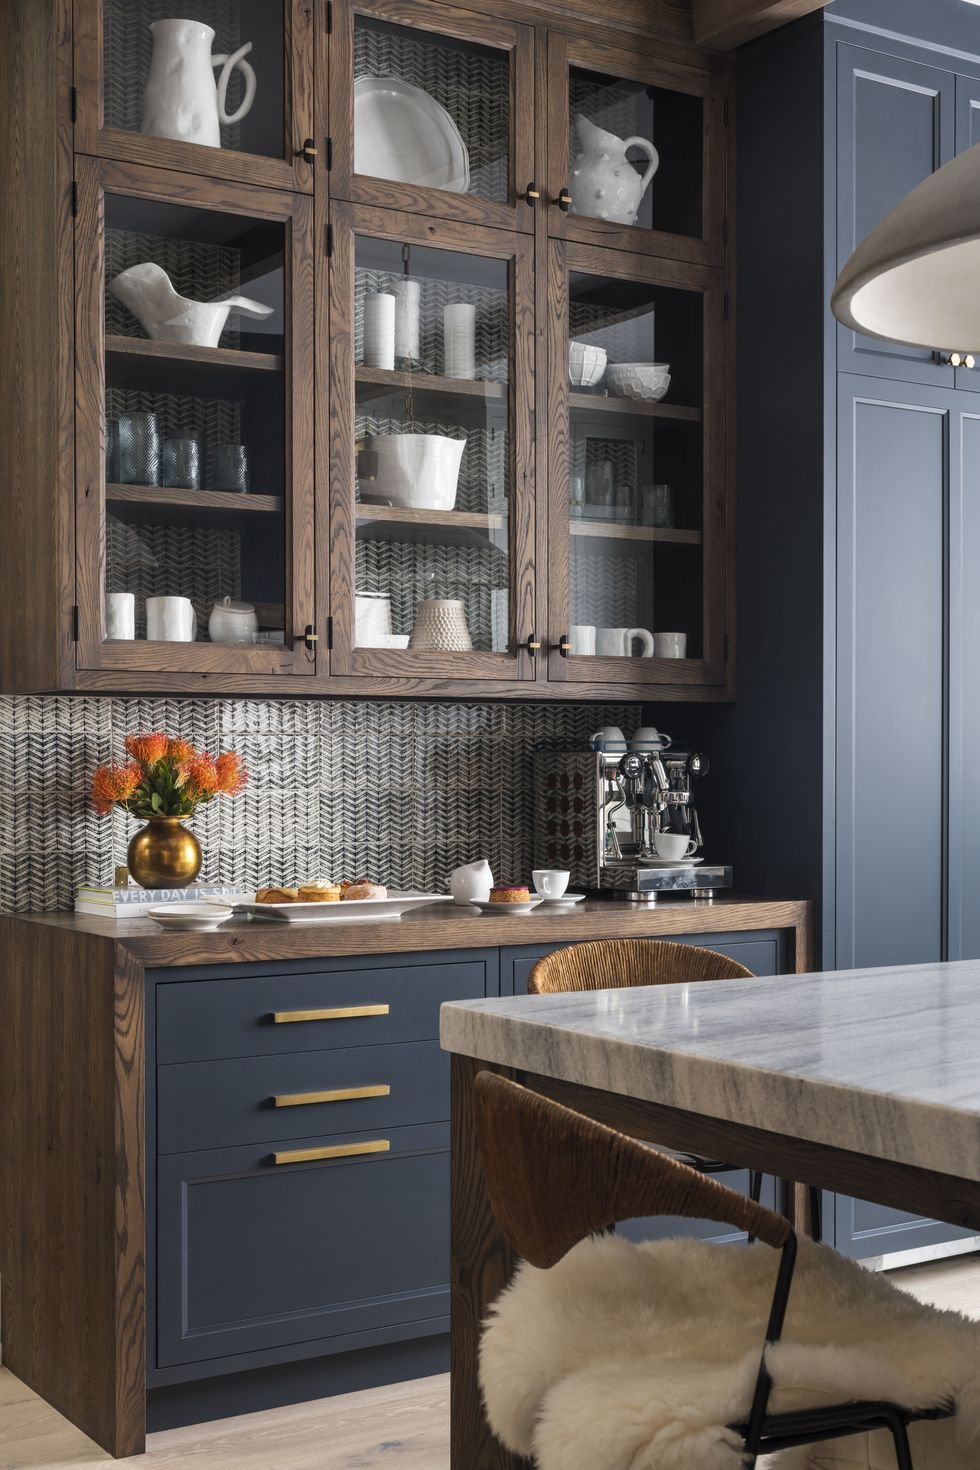 10 KITCHEN TRENDS TO WATCH OUT FOR IN 2023! — Soheila